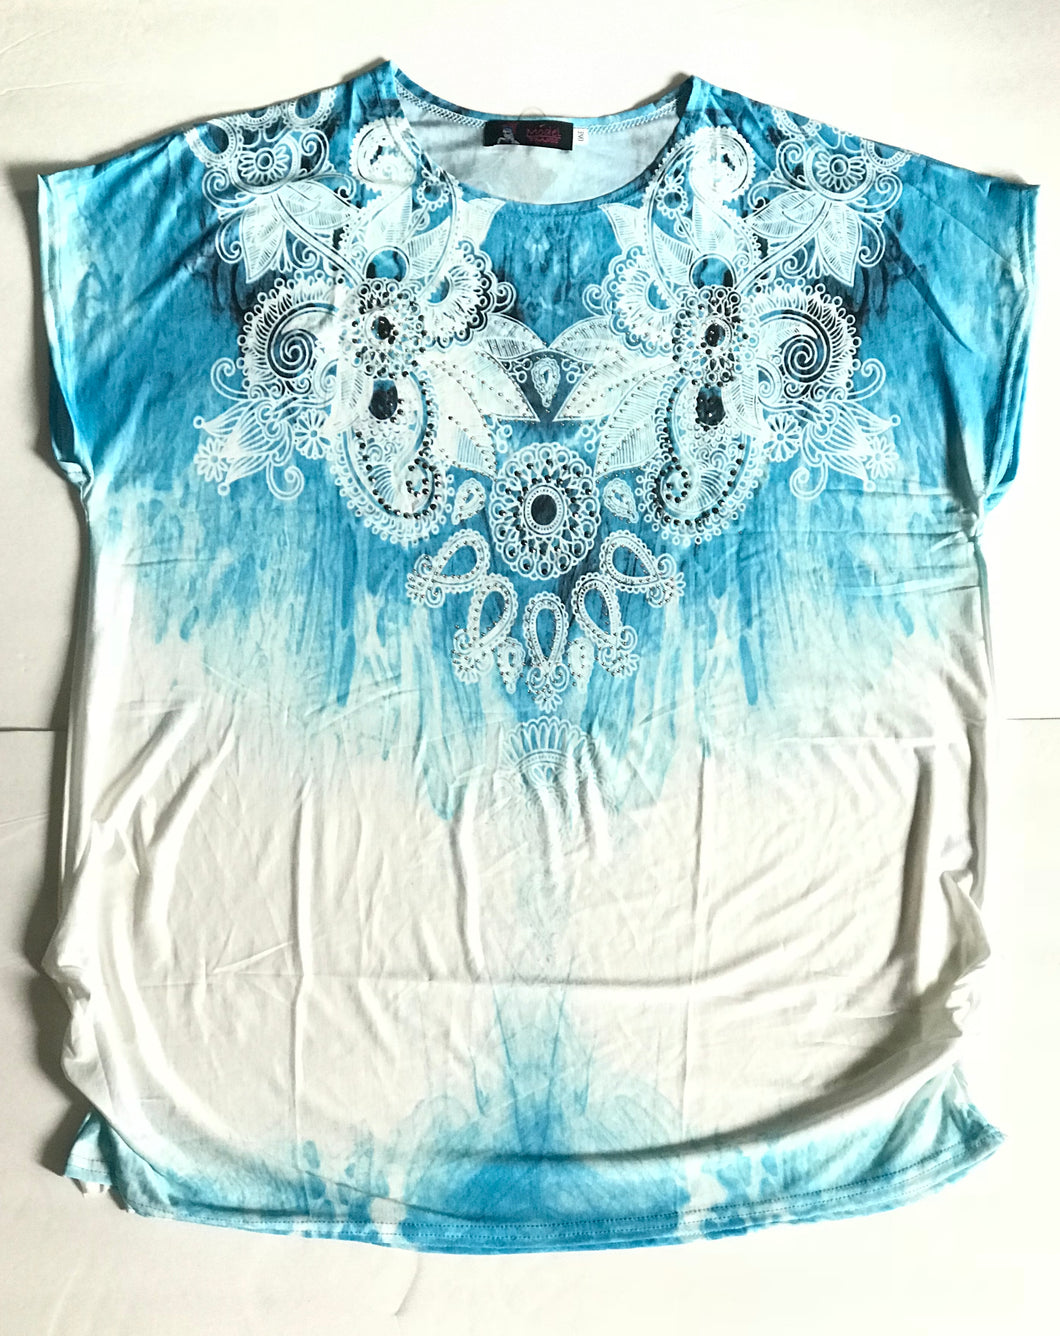 Soft Blue/White with Sparkle Fun Top